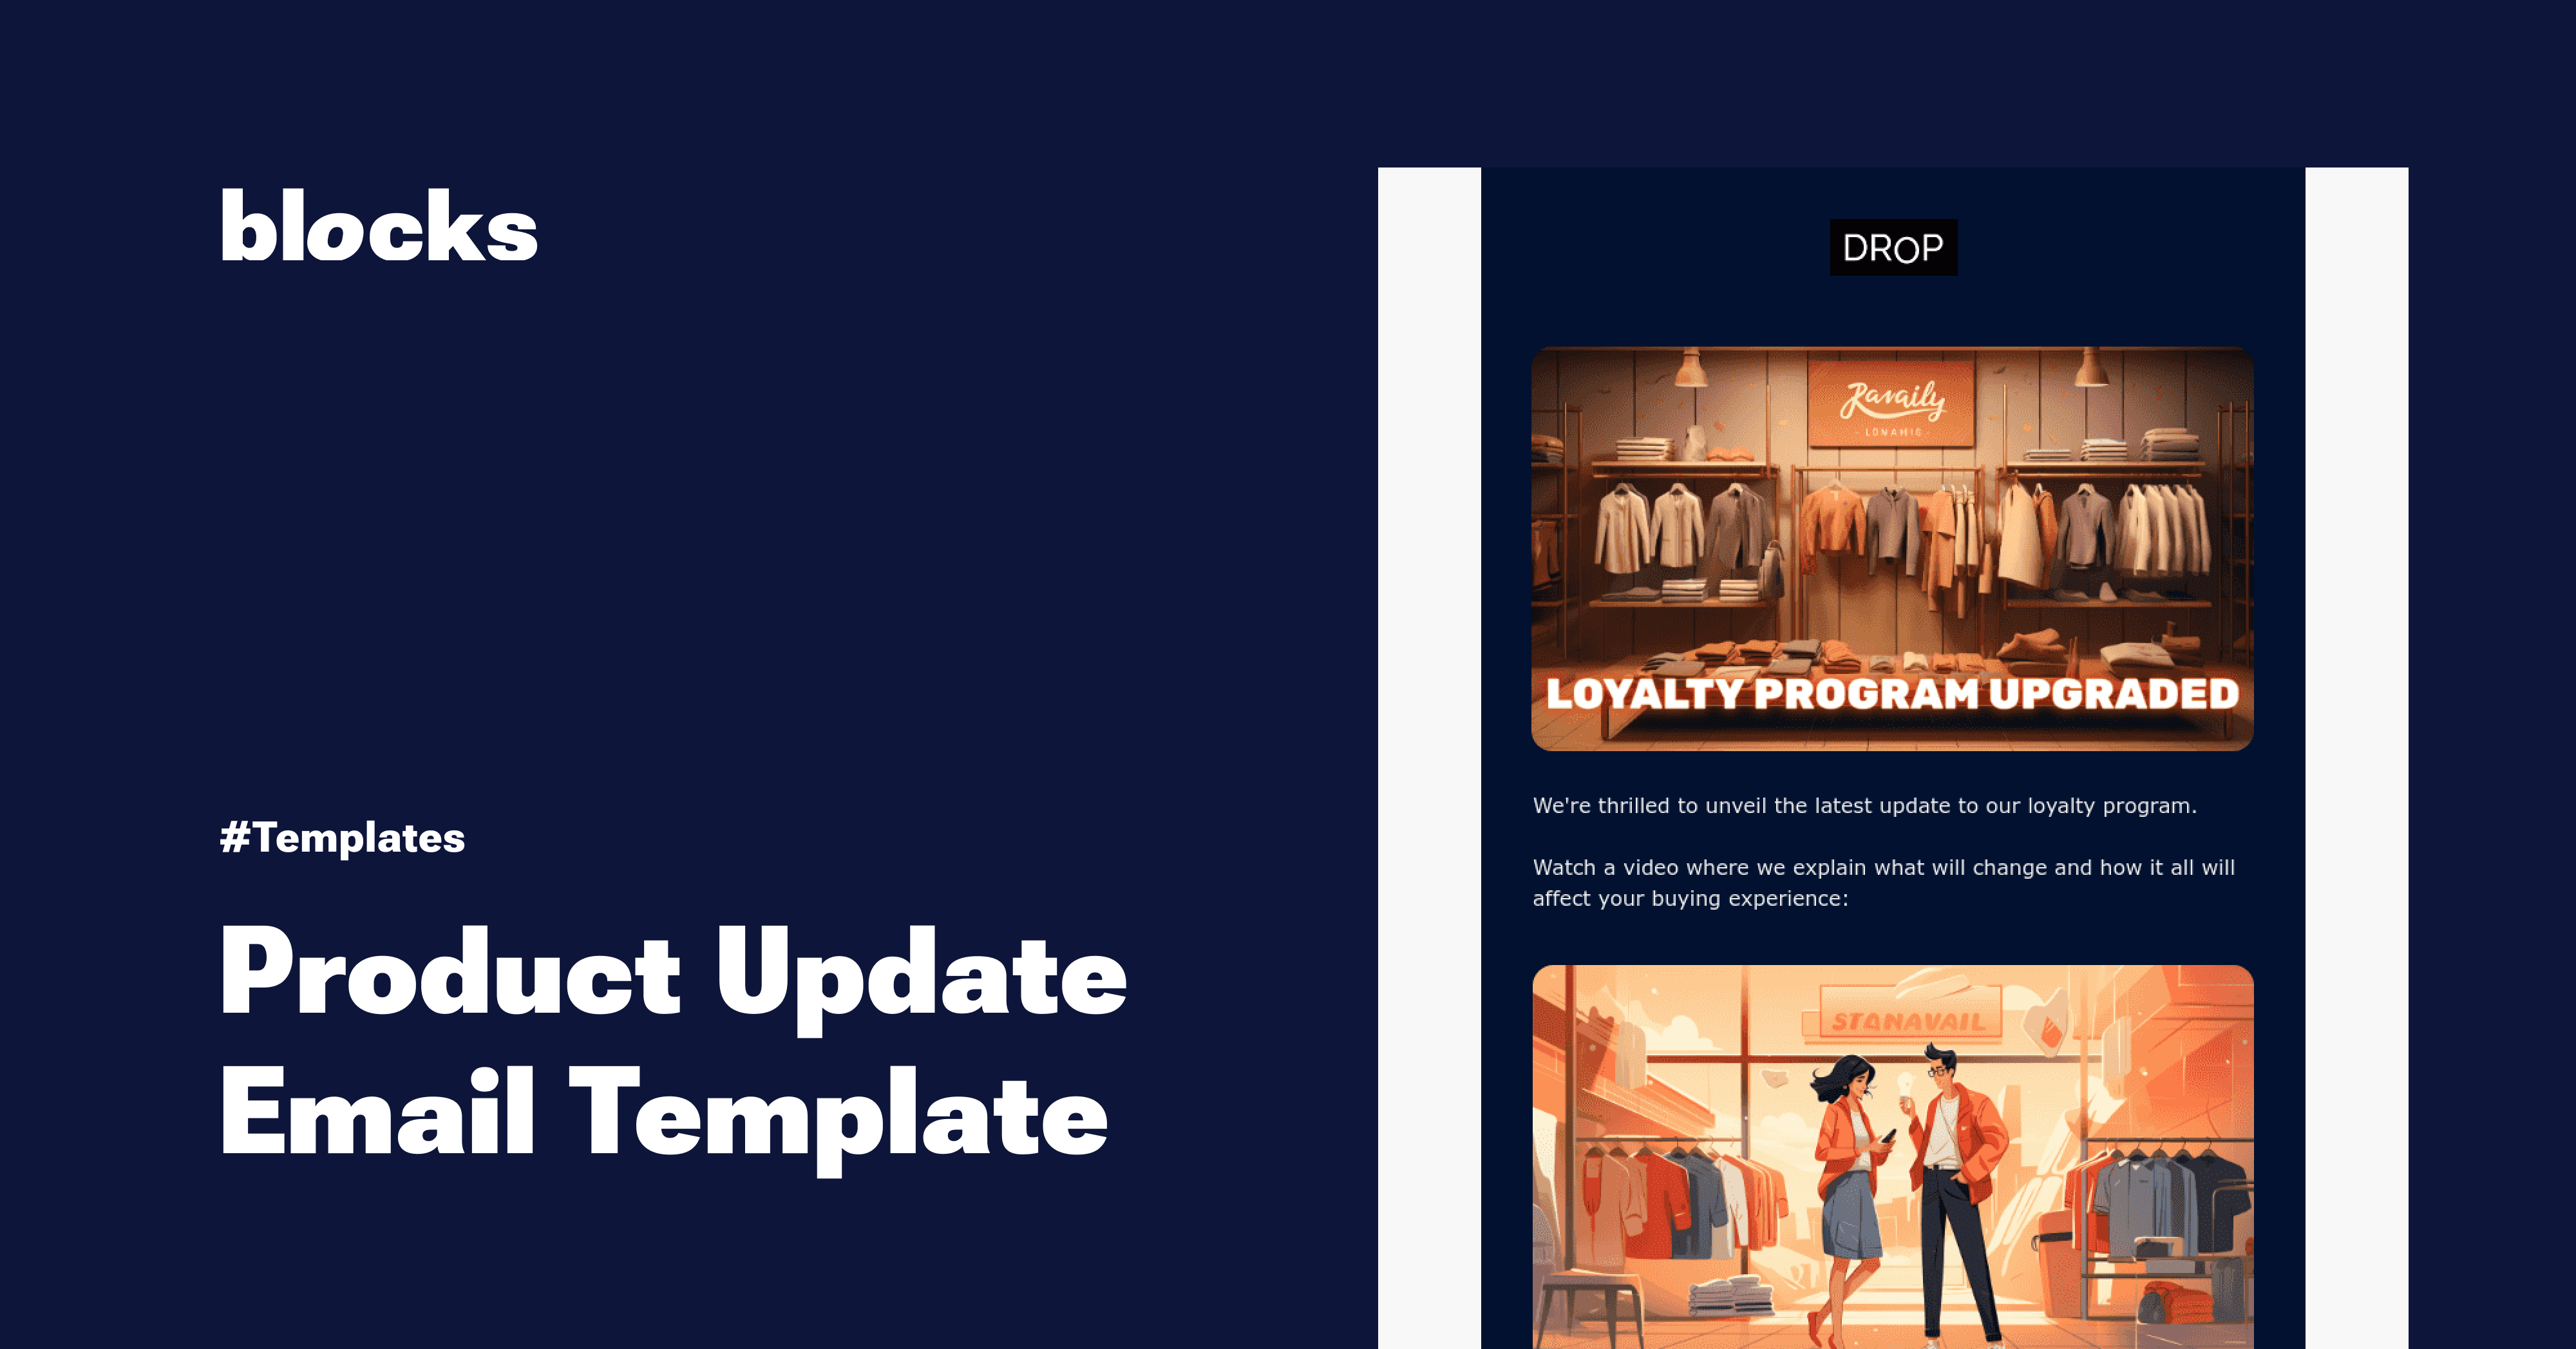 Revitalize Your Offerings: Product Update Email Template Blocks